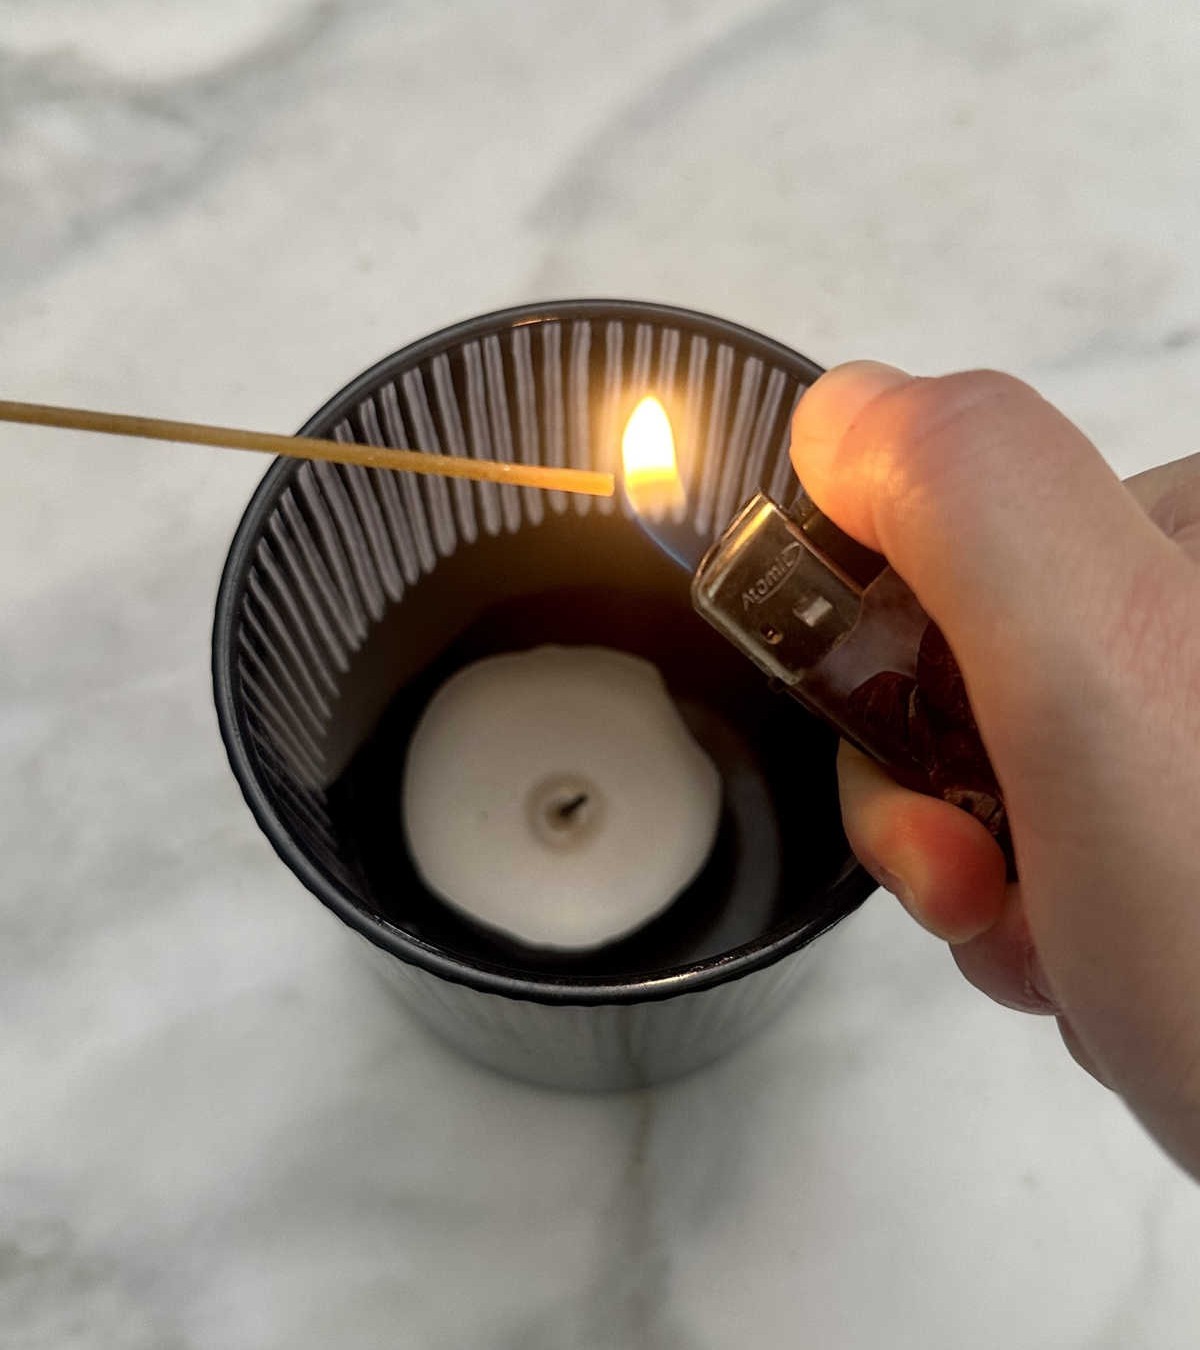 Use Spaghetti to Light Candles